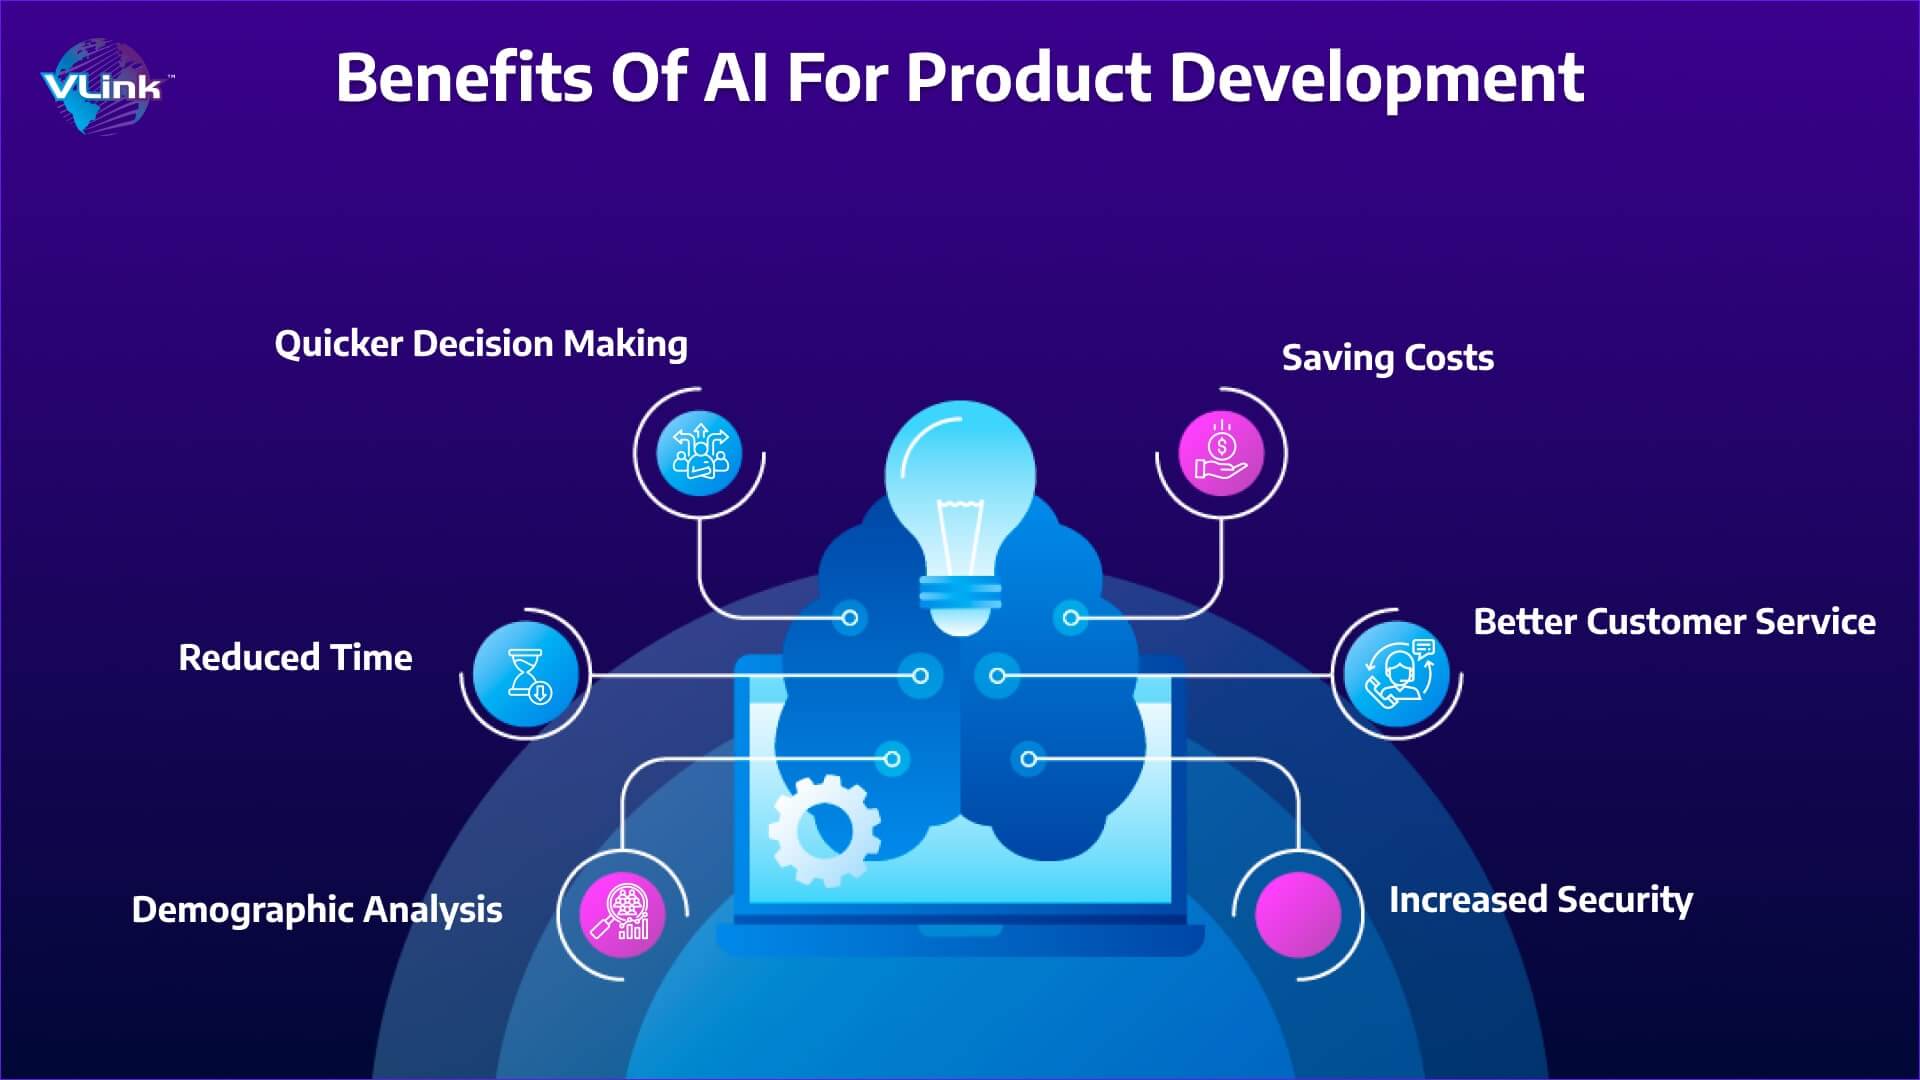 What are the Benefits of AI for Product Development